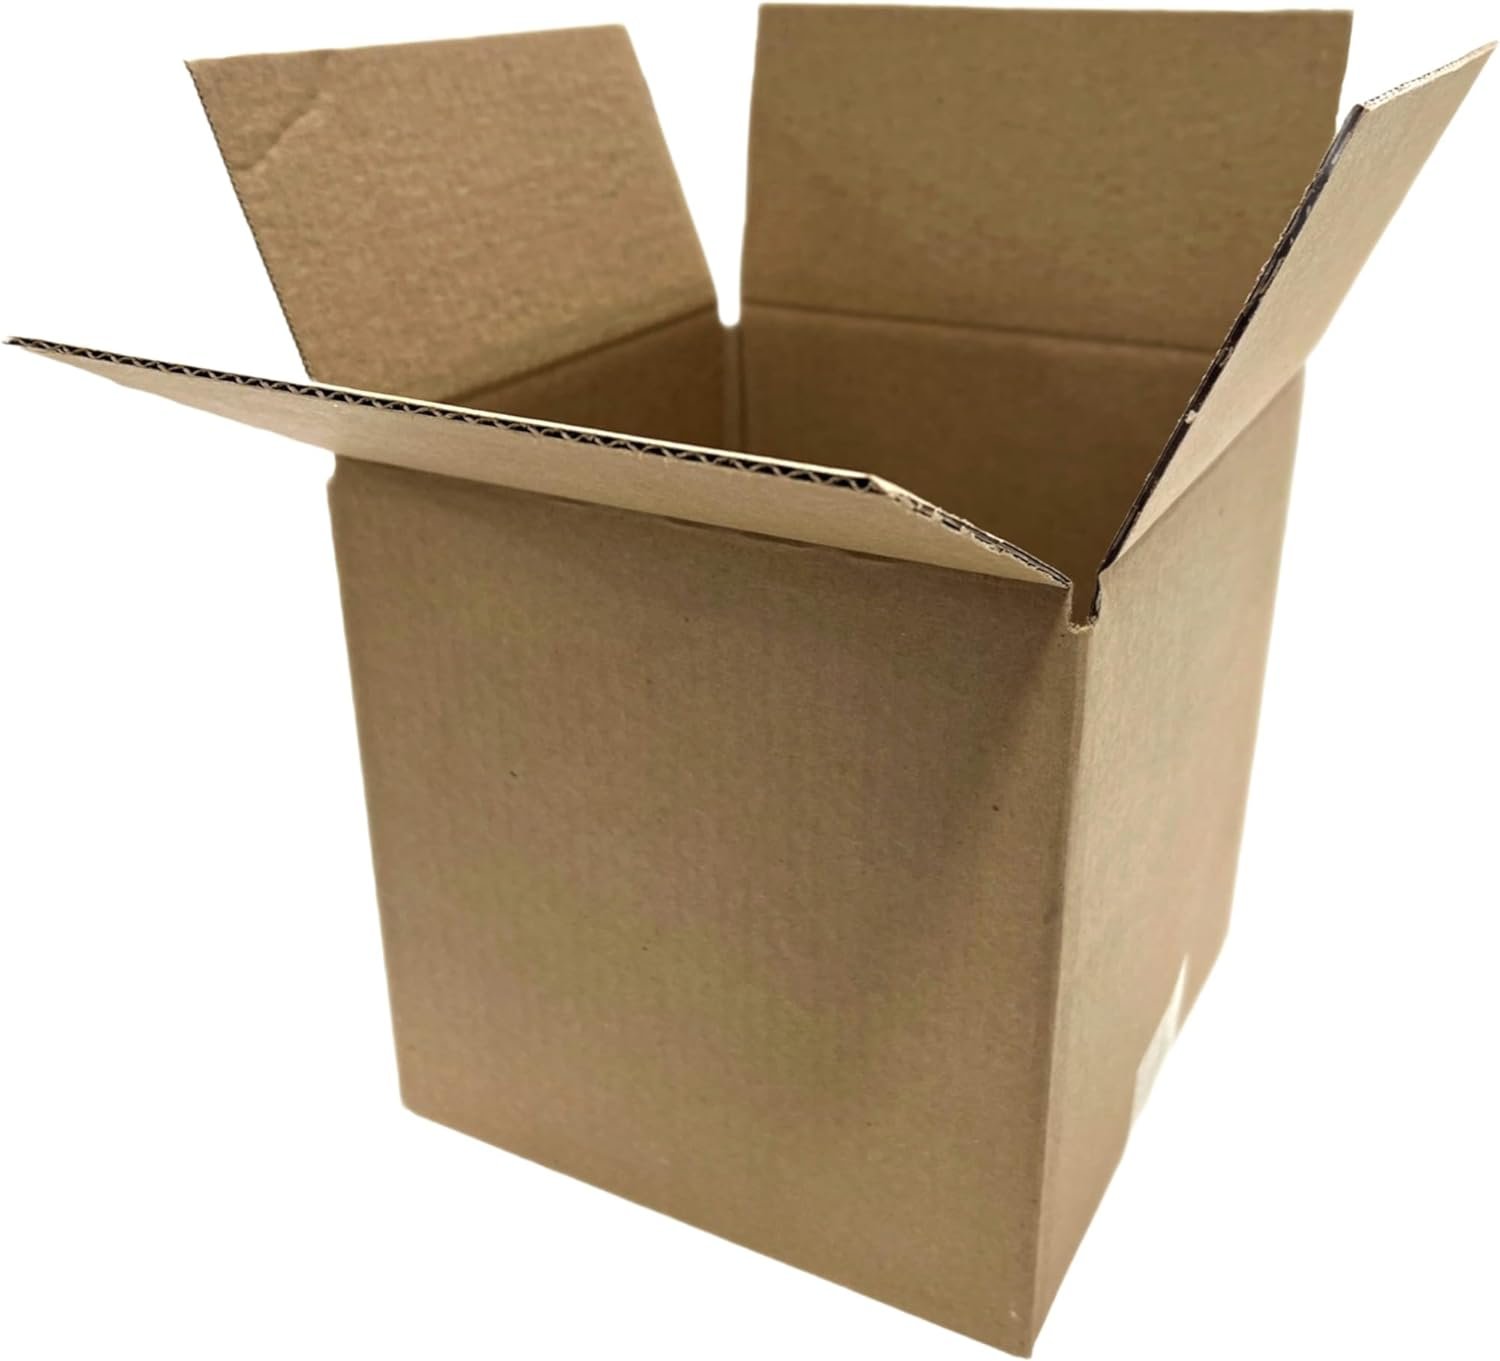 250 4x4x4 Cardboard Paper Boxes Mailing Packing Shipping Box Corrugated Carton